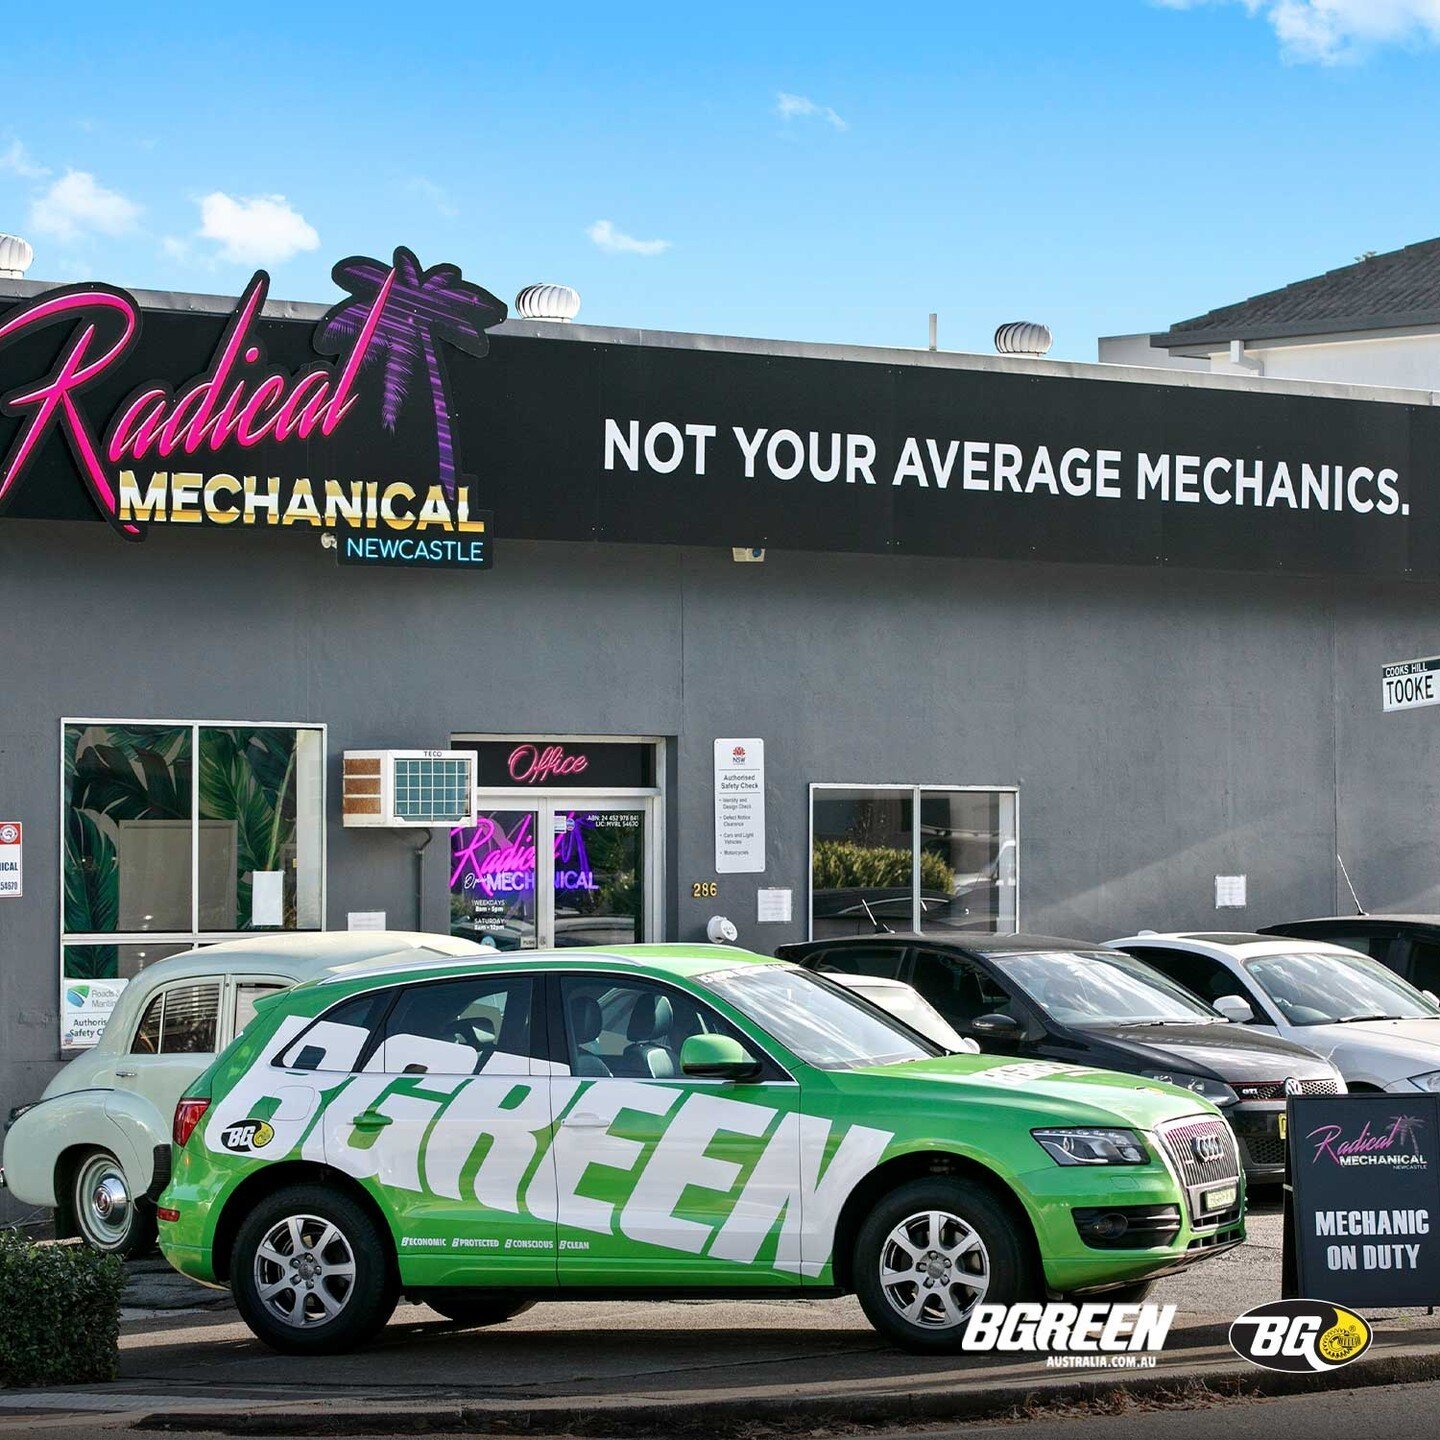 Stand out from the crowd with BG Products and take that step forward to a brighter future.
Learn more at www.bgreenaustralia.com.au

#loweremissions #BGAustralia #BGreenAustralia #BGproducts #Australia #clean #economic #protected #conscious #mechanic